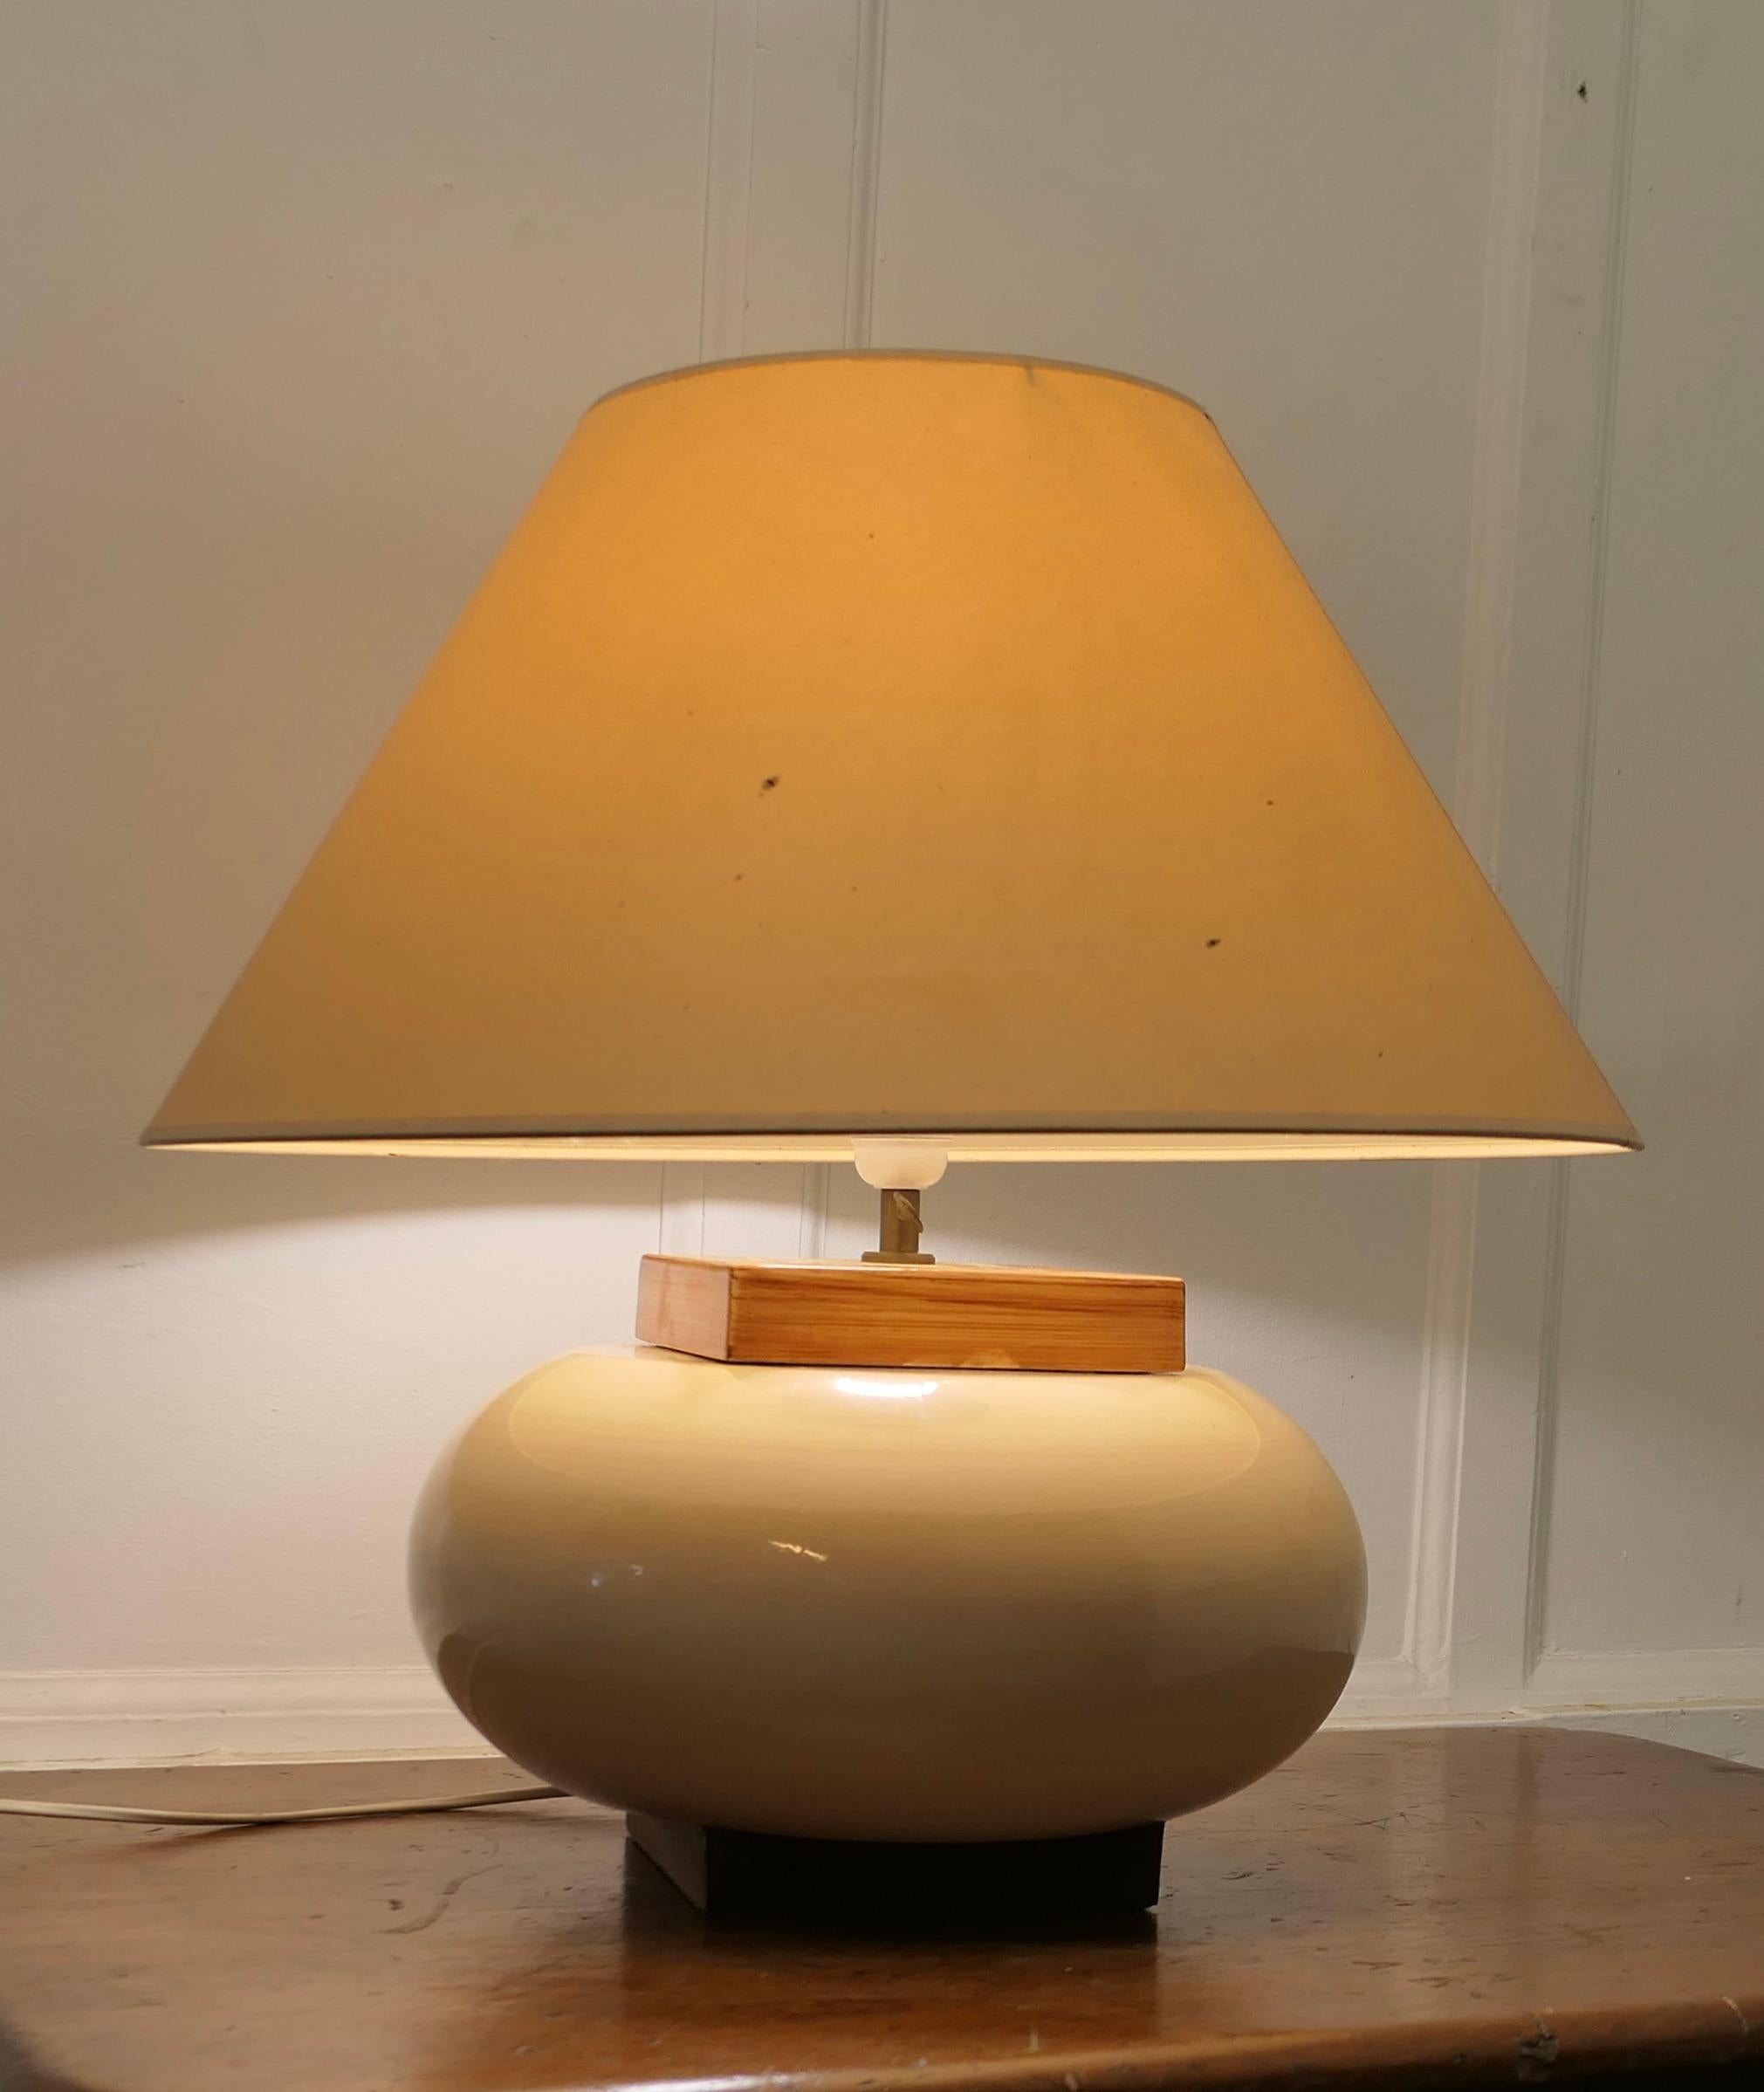 A Large Kostka Sideboard Pebble Lamp

A Large French pebble set between Rectangular base and top, the lamp is in relaxed Summer Colours and has its original cream Coolie Lampshade
All working and a great looker
The lamp is 21” tall, and 22” in